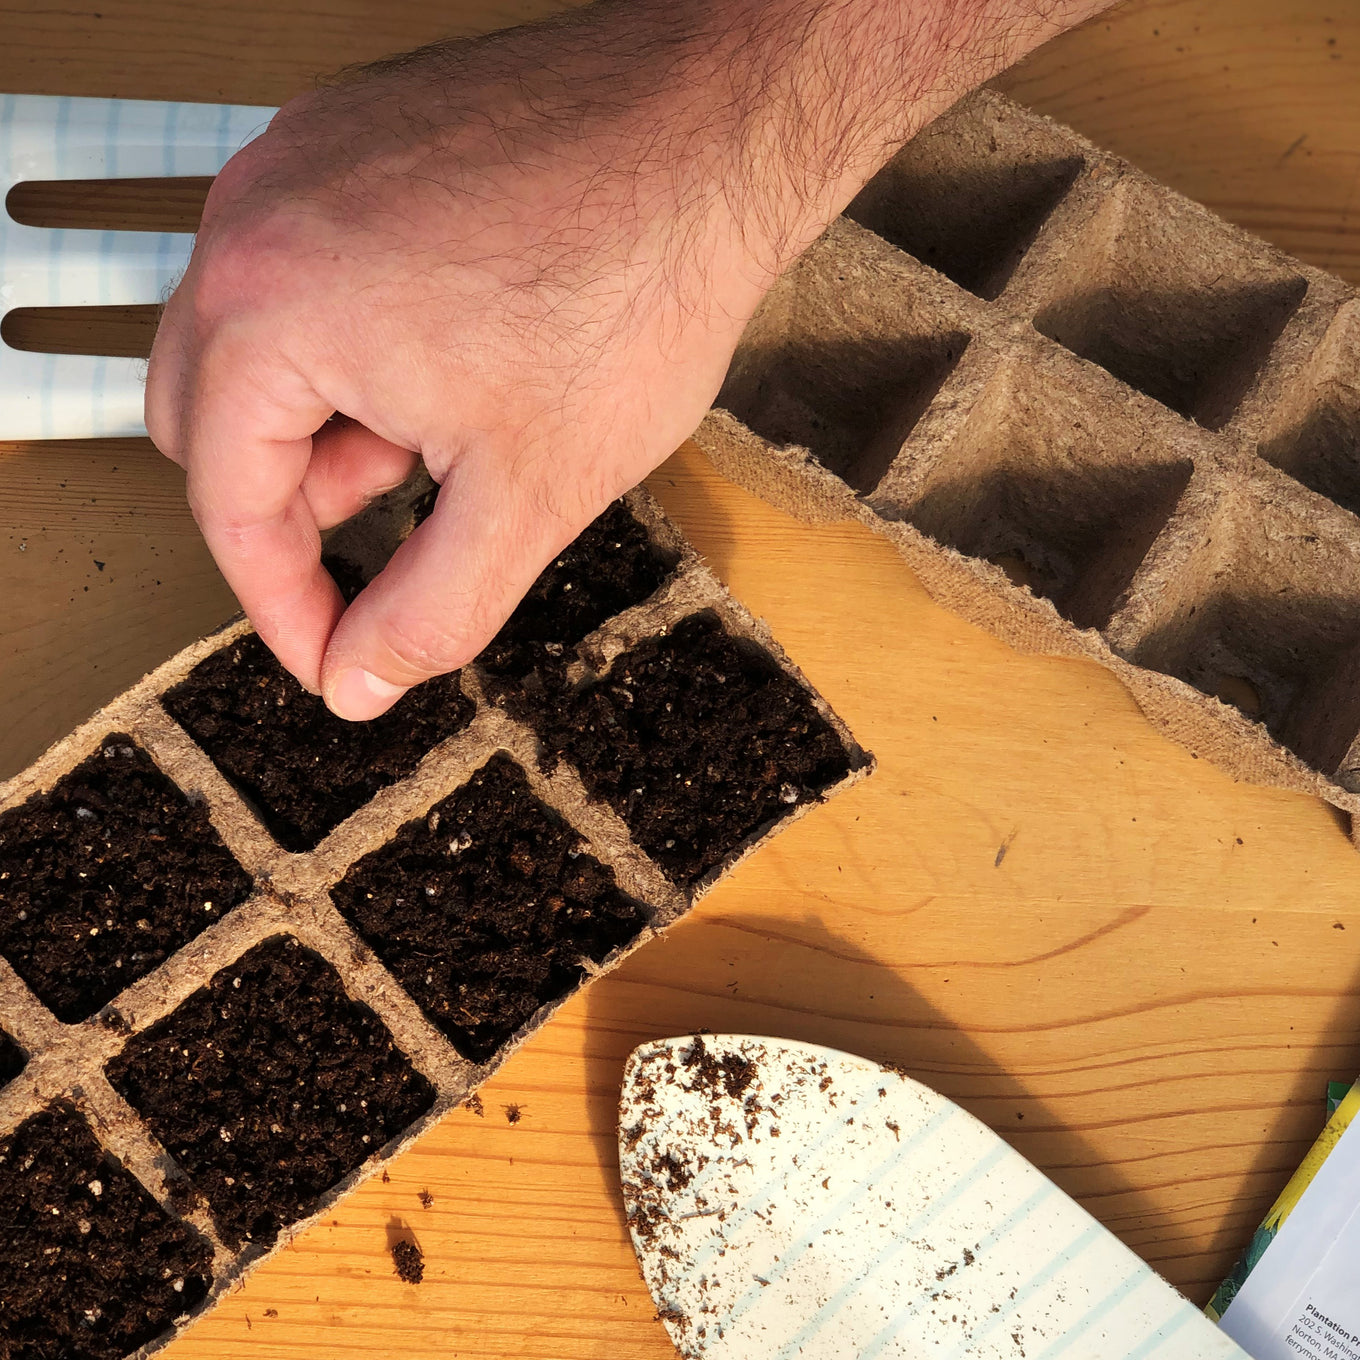 Start your Big Max Pumpkin seeds in biodegradable peat strip trays filled with sowing mix.